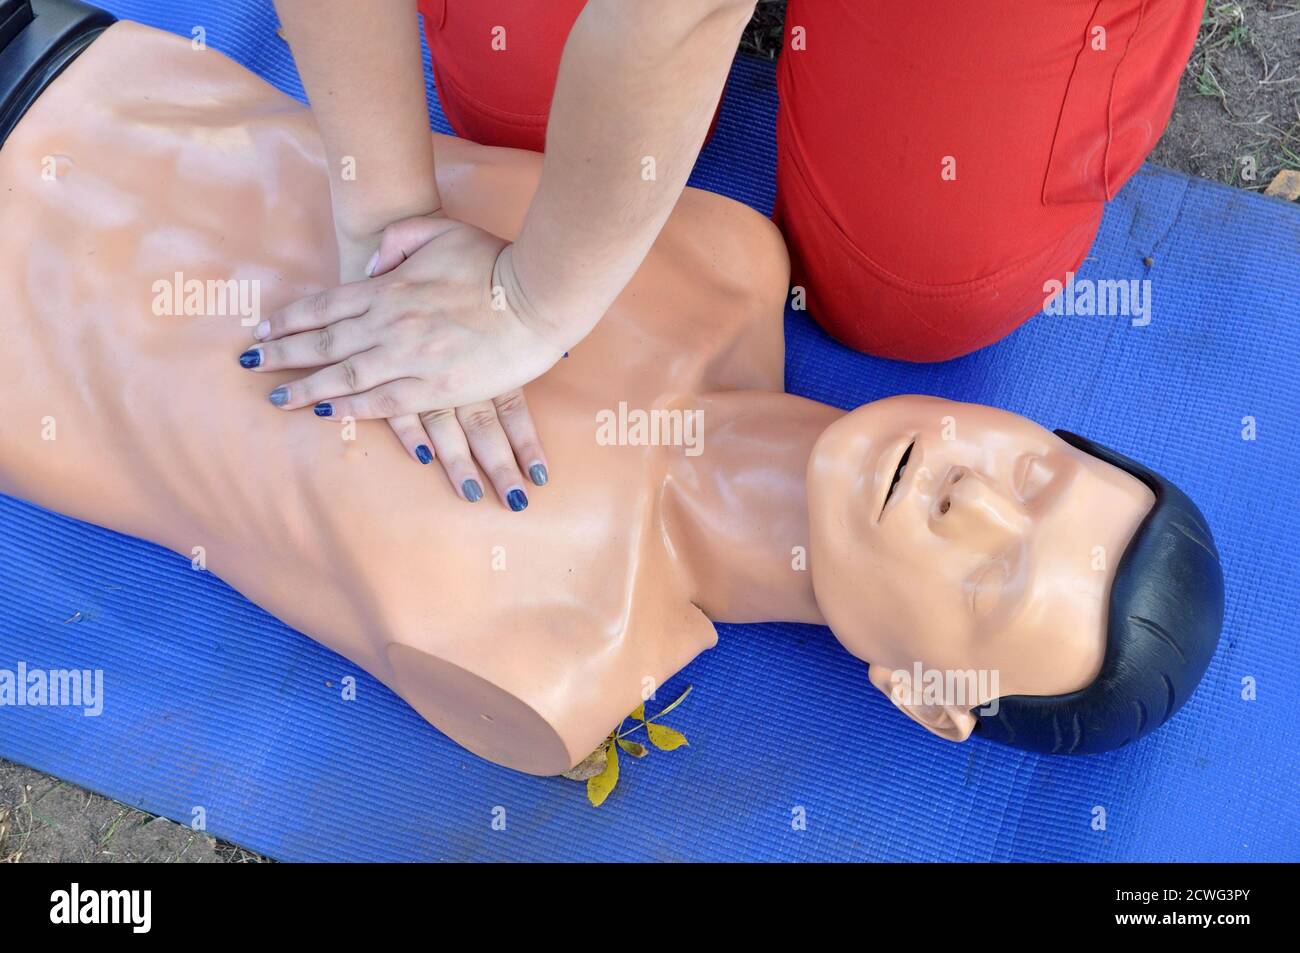 dummy for training in the implementation of resuscitation measures. Indirect cardiac massage. Stock Photo